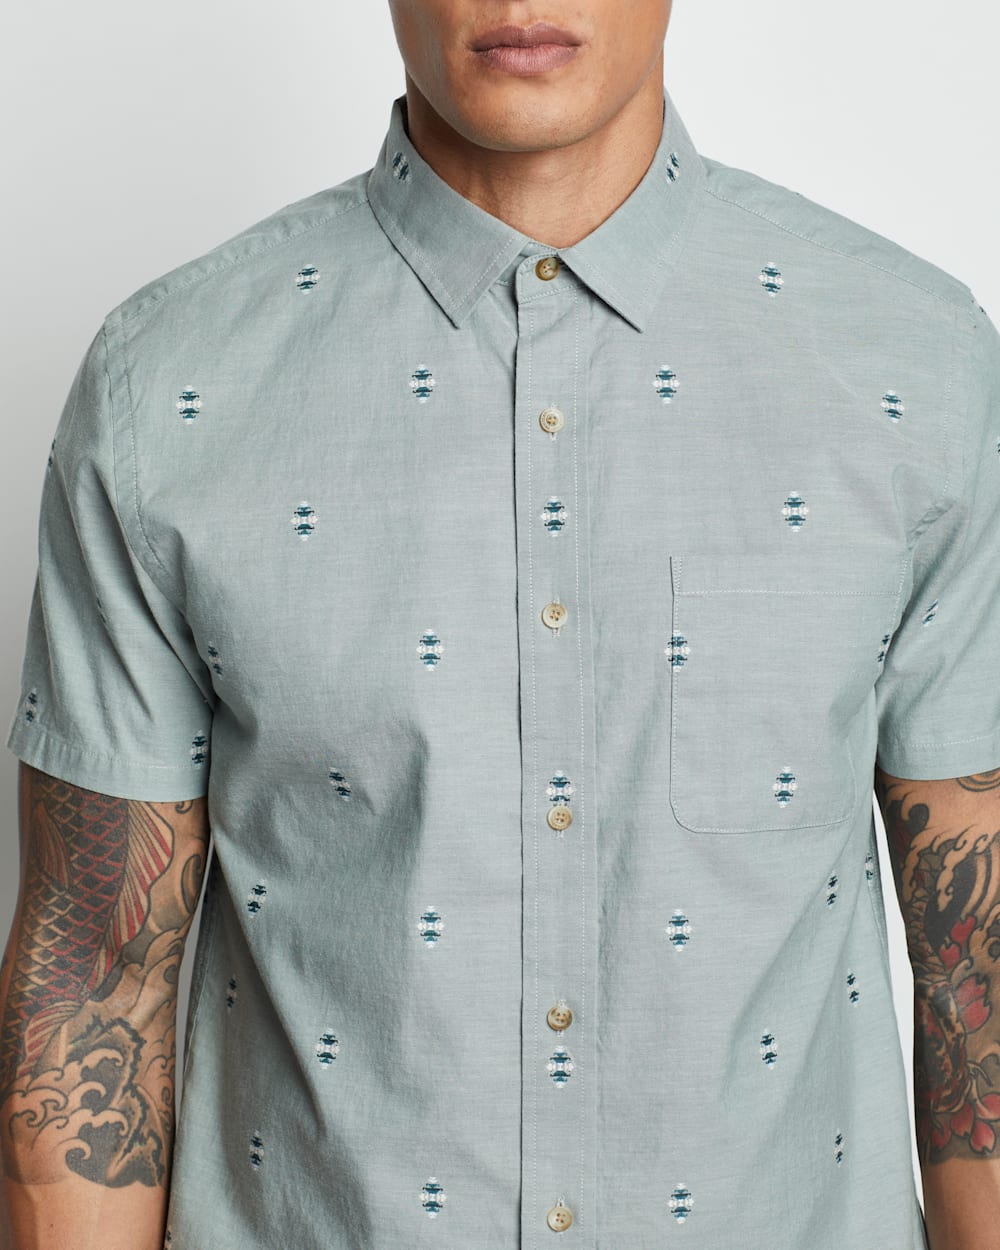 ALTERNATE VIEW OF MEN'S SHORT-SLEEVE CARSON CHAMBRAY DOBBY SHIRT IN CHAMBRAY DOBBY image number 5